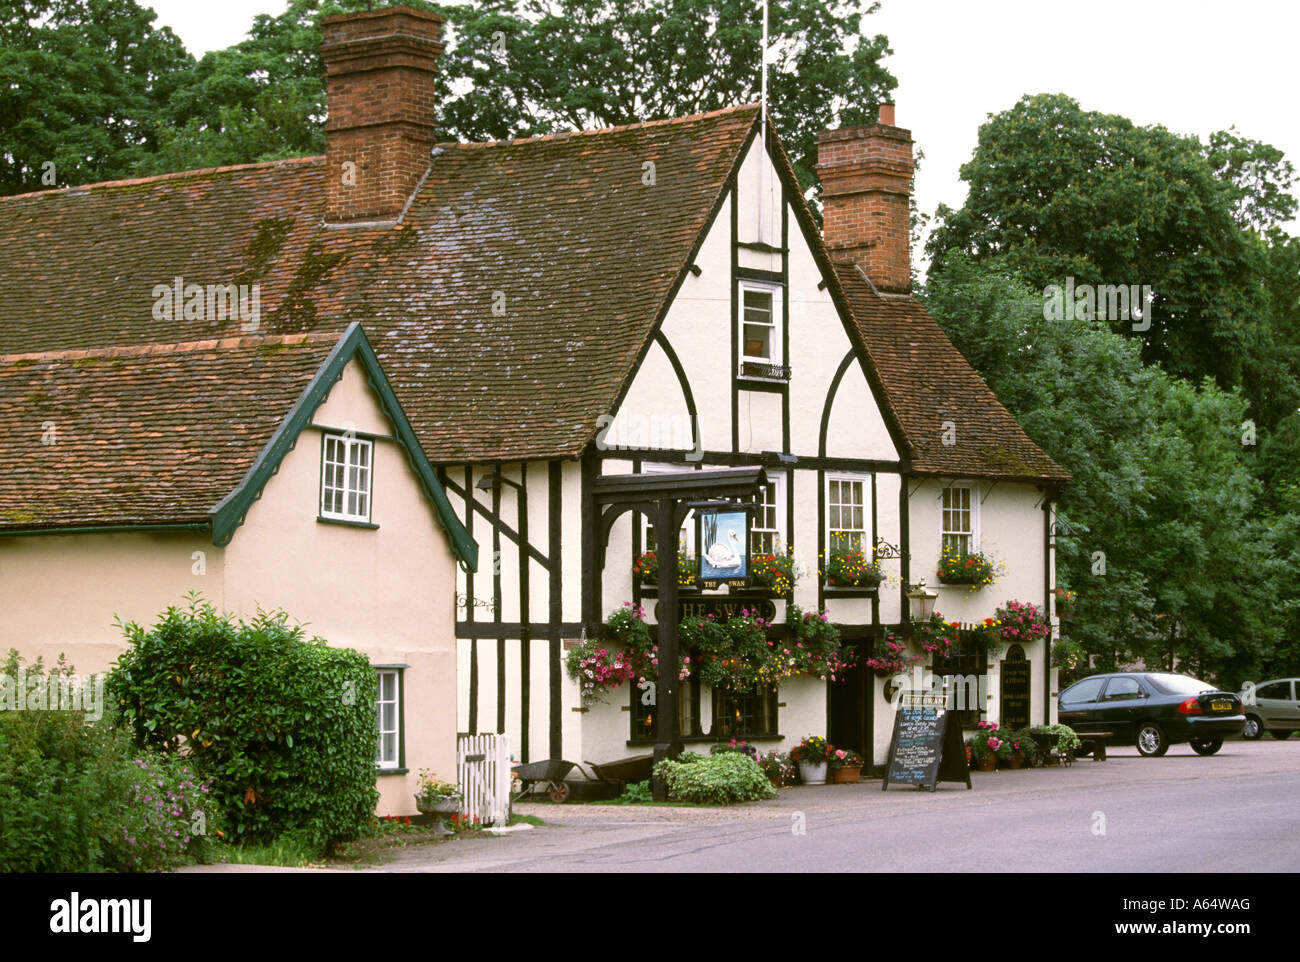 Regno Unito Inghilterra Essex Constable Country Stratford St Mary Swan Inn Foto Stock